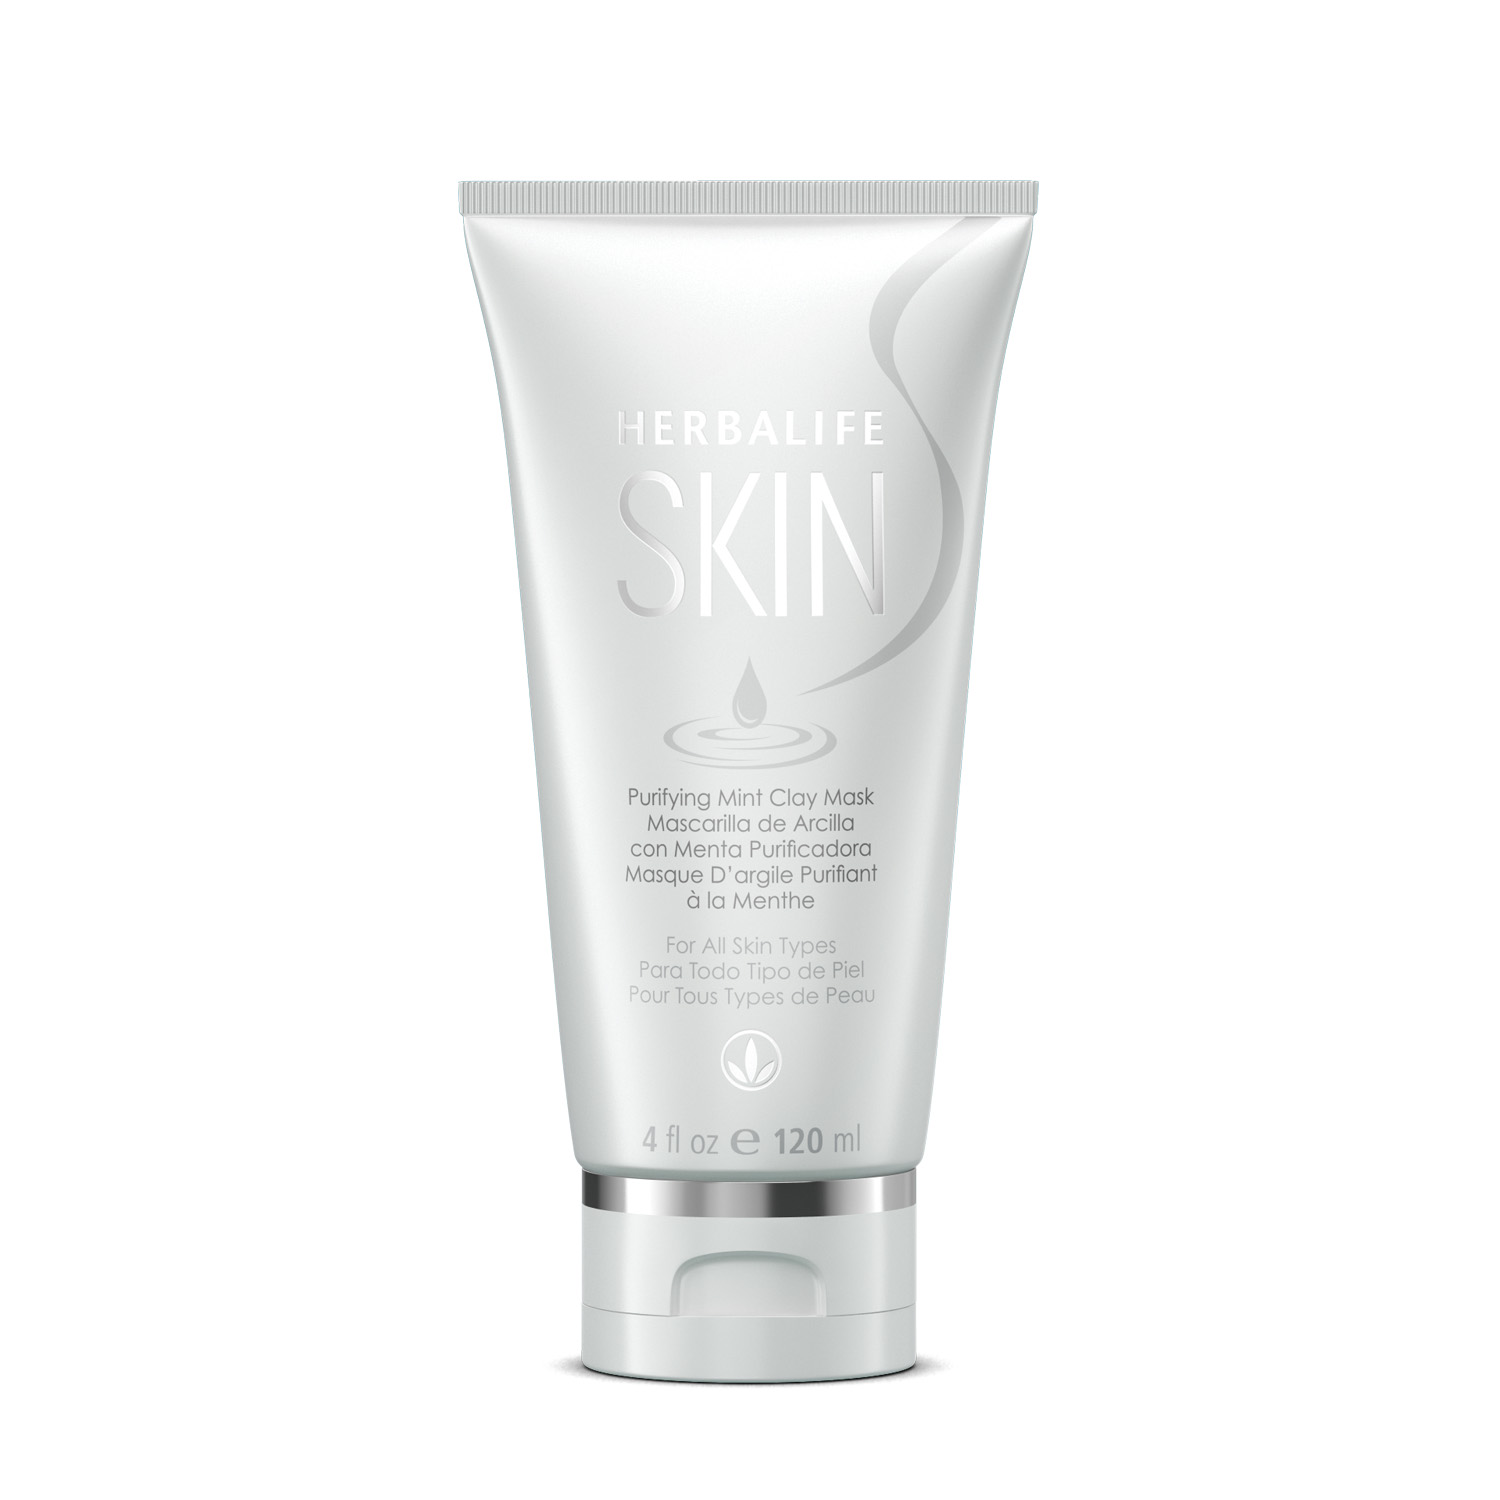 0773 Herbalife SKIN Purifying Mint Clay Mask